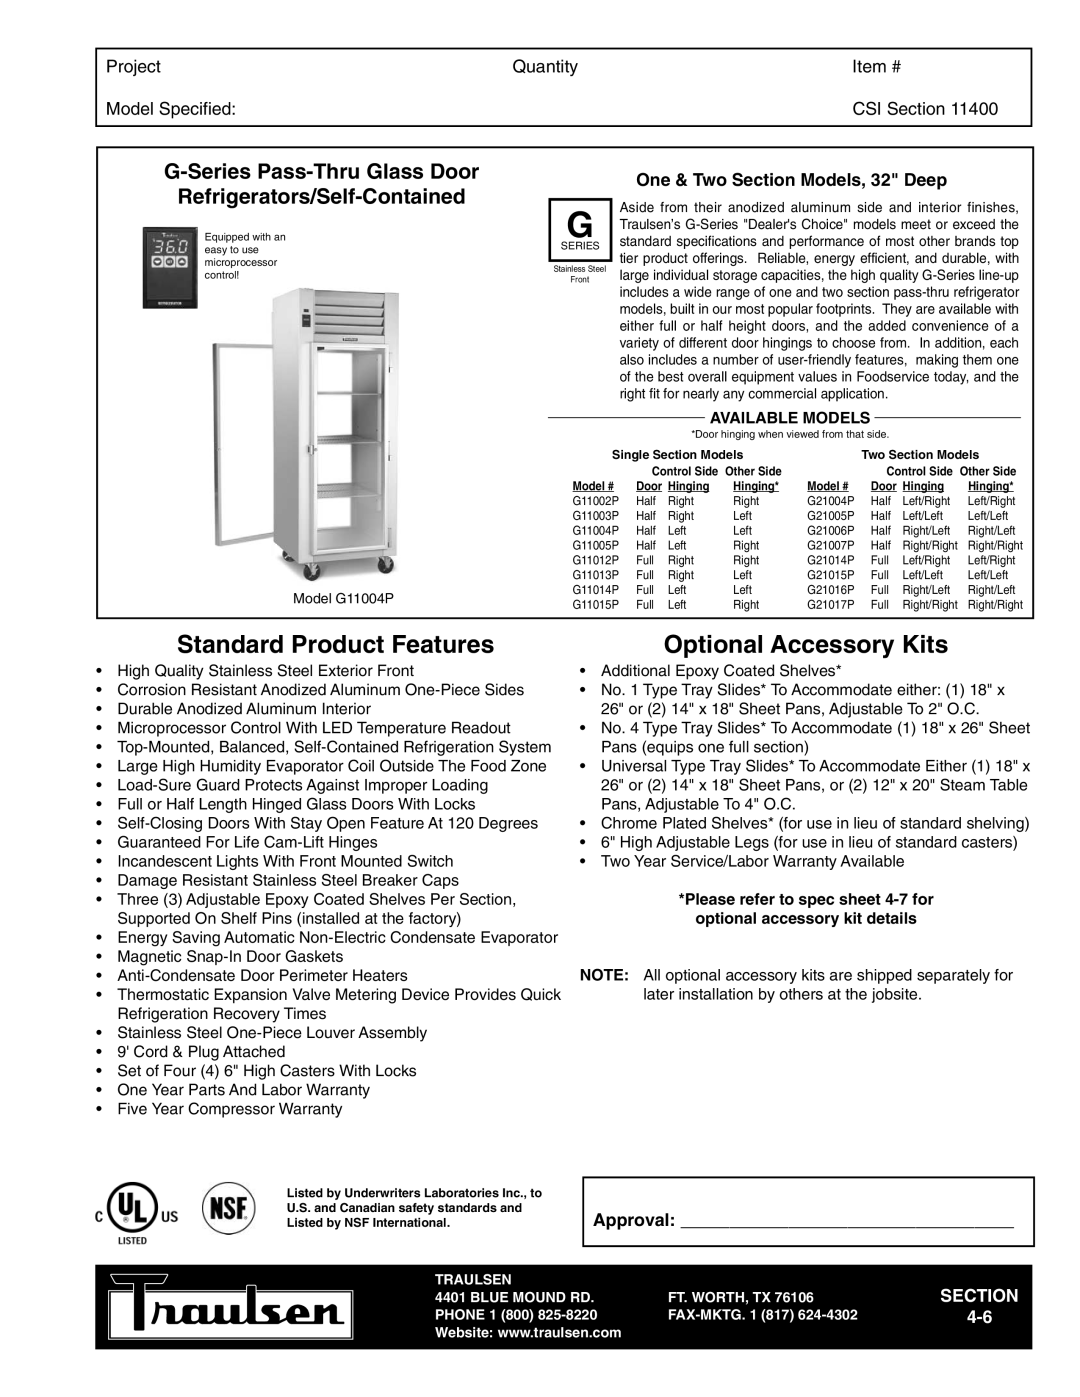 Traulsen TR35786 warranty G-Series Pass-ThruGlass Door, Refrigerators/Self-Contained, Project, Quantity, Item #, Section 